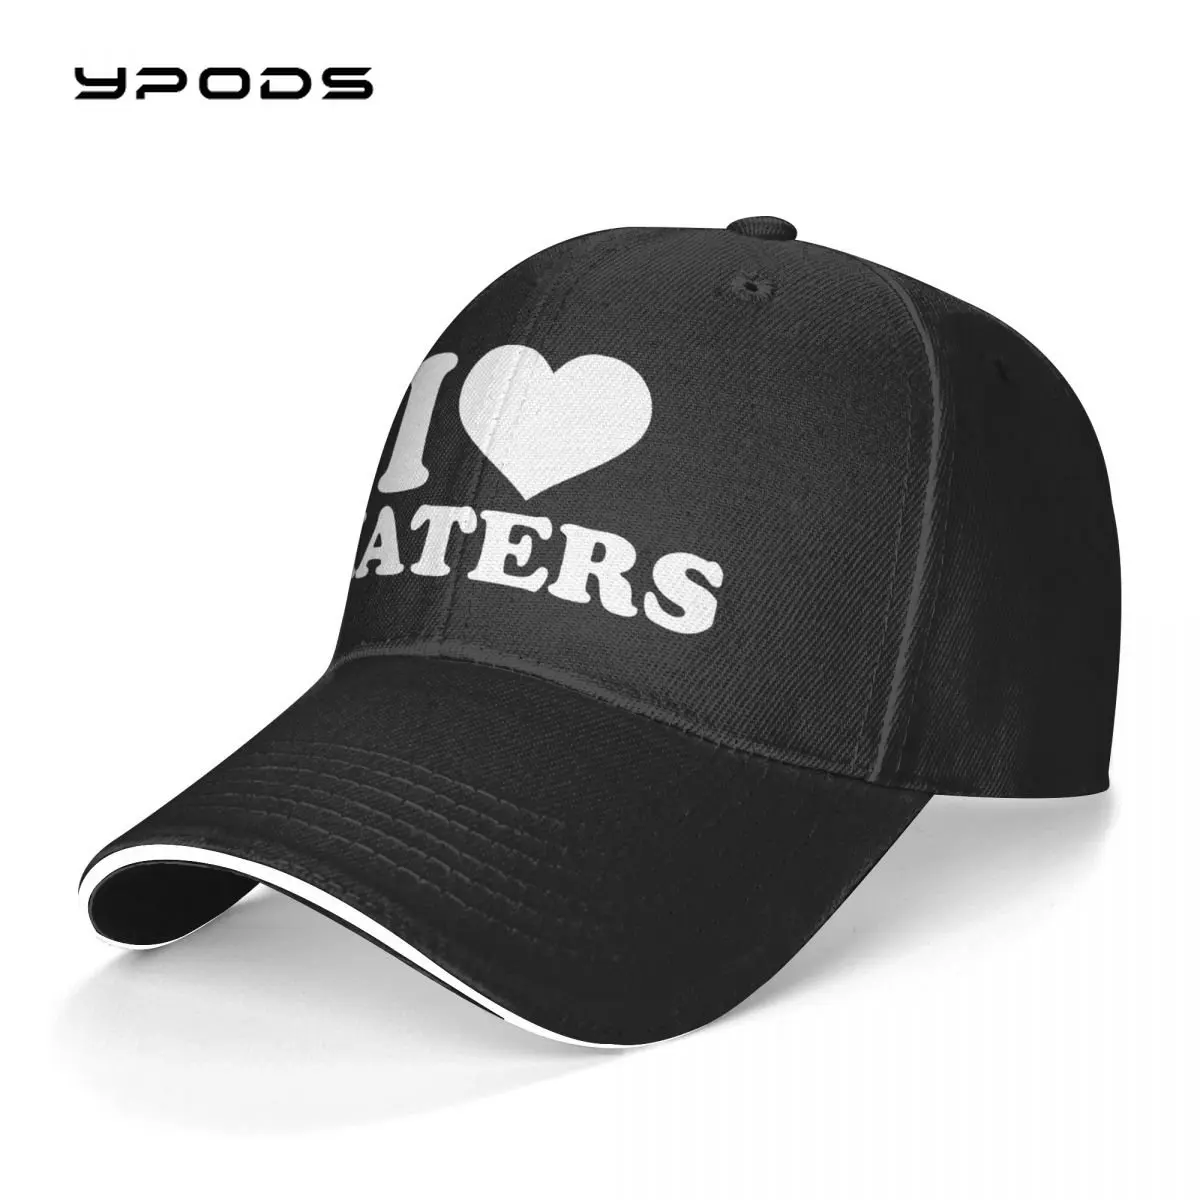 

I LOVE MY HATERS Men's New Baseball Cap Fashion Sun Hats Caps for Men and Women